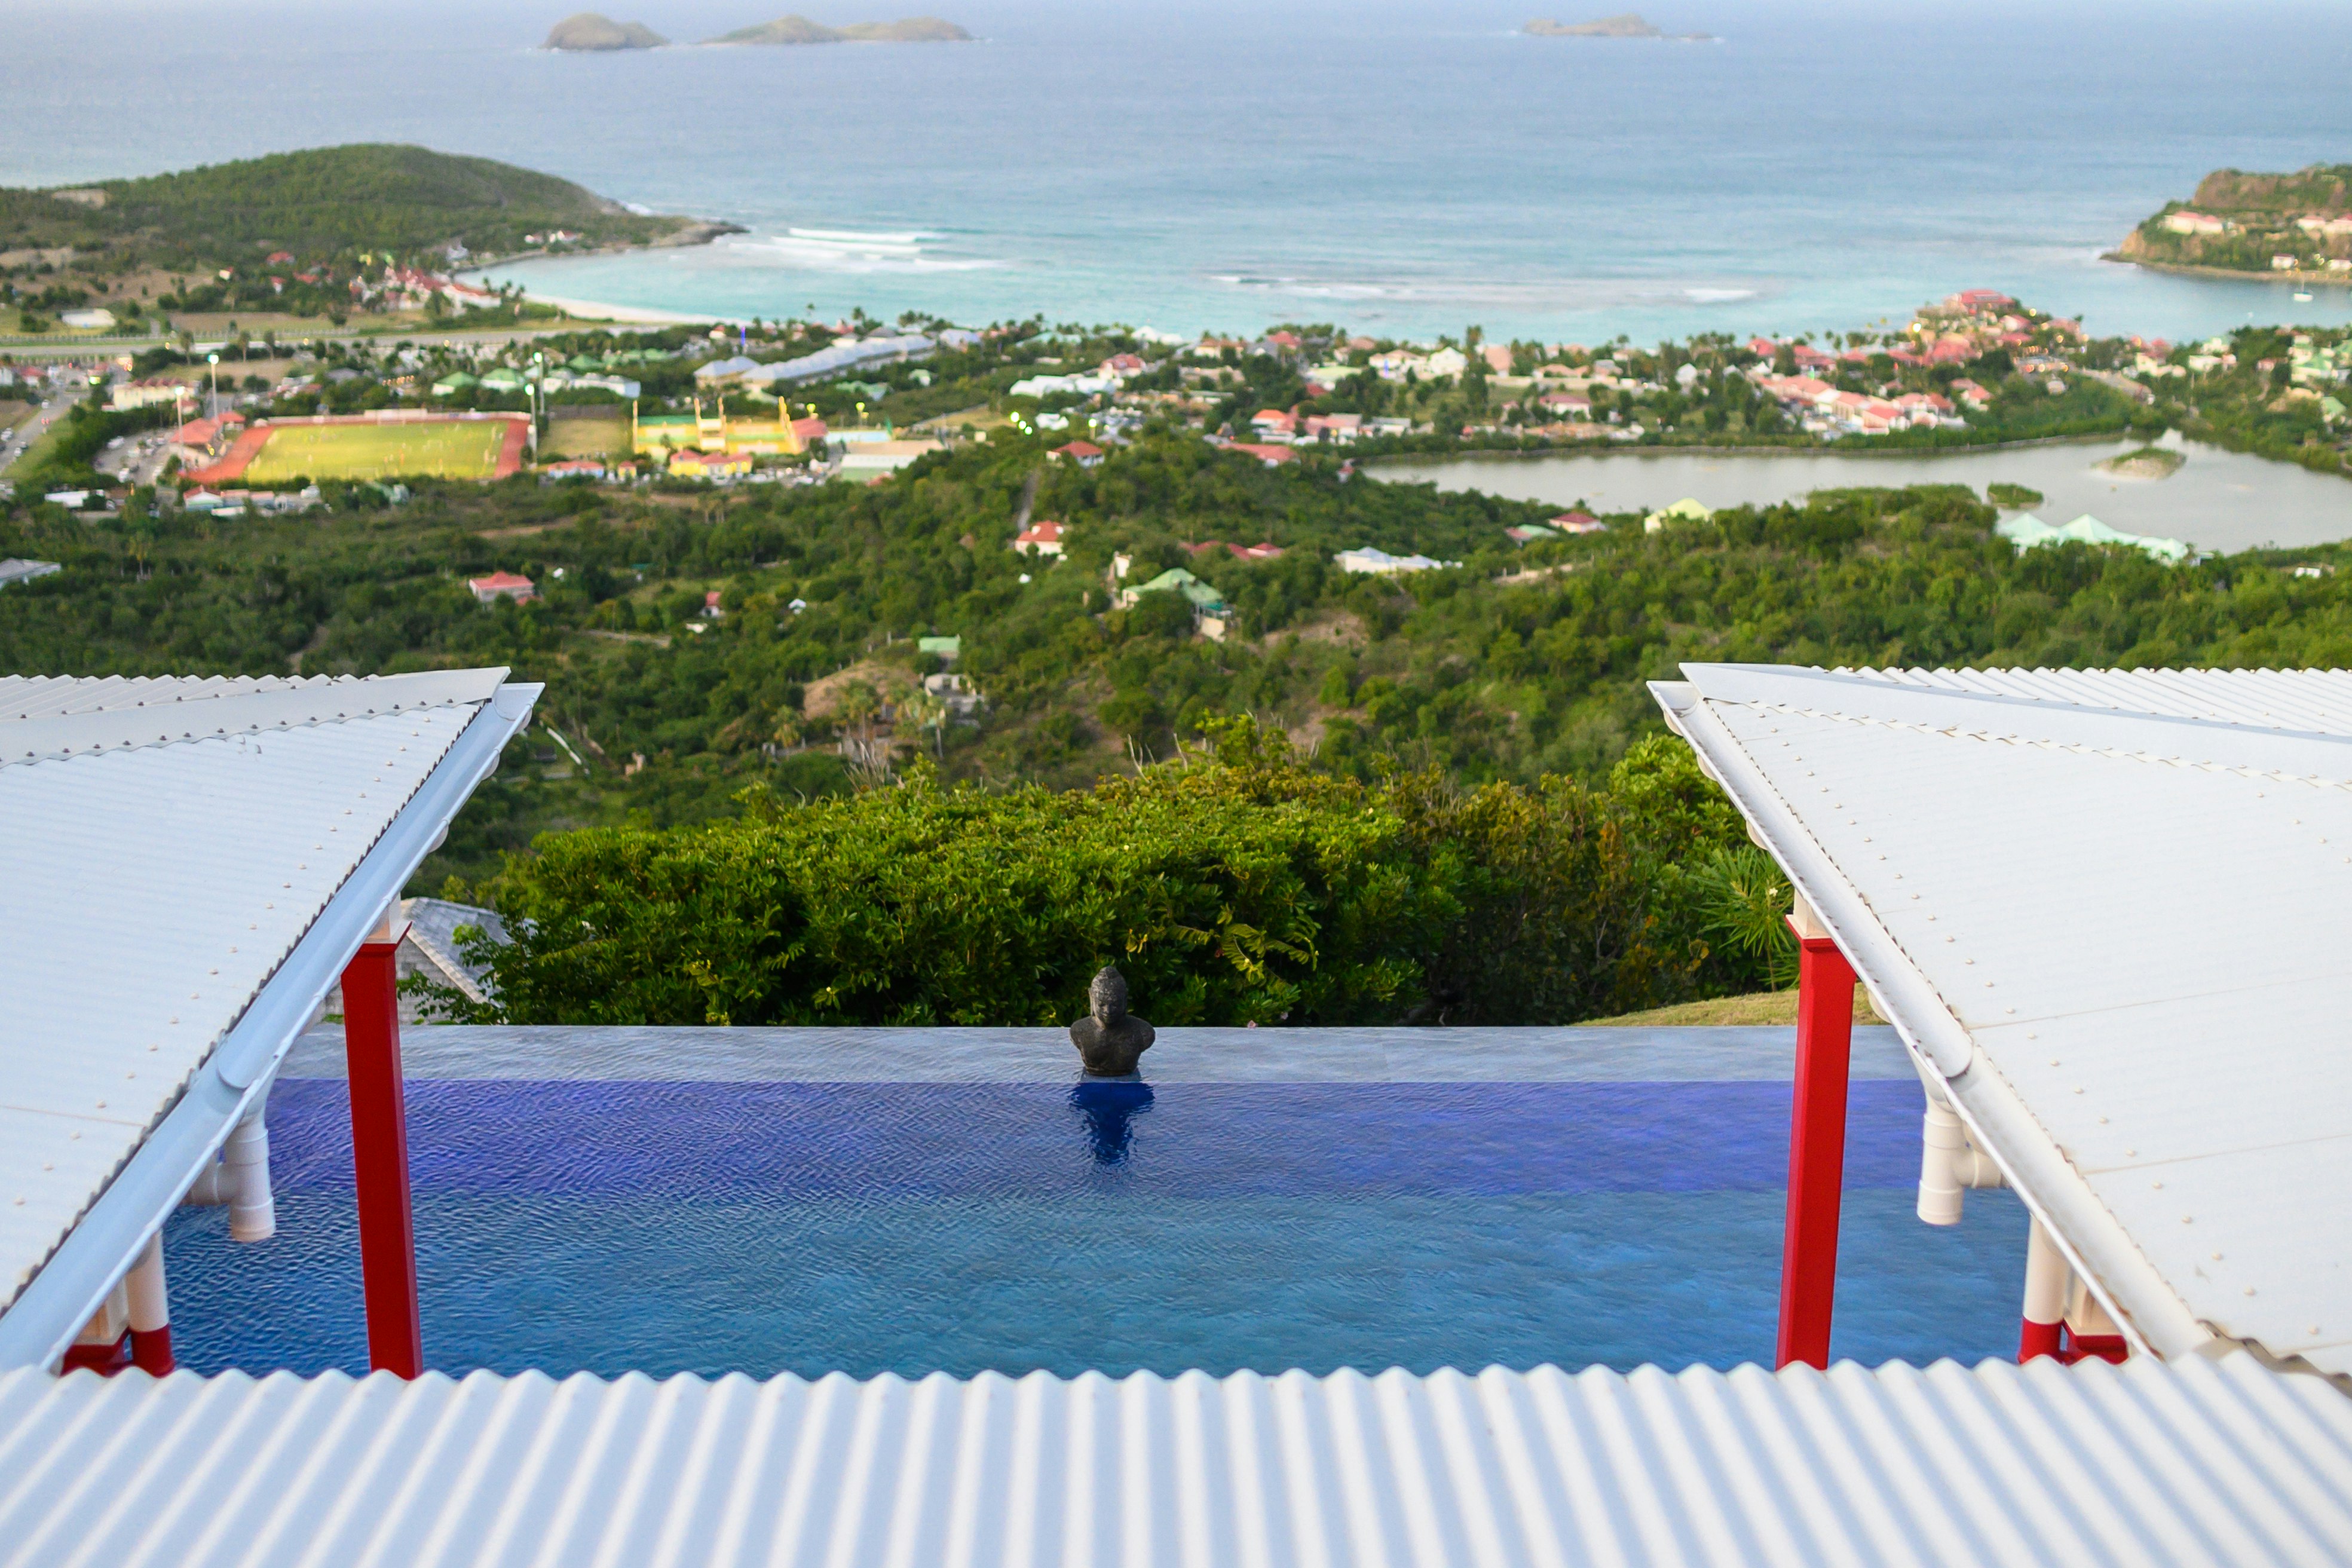 The rooftop views from Le Barth Villas extend over the town of Gustavia.